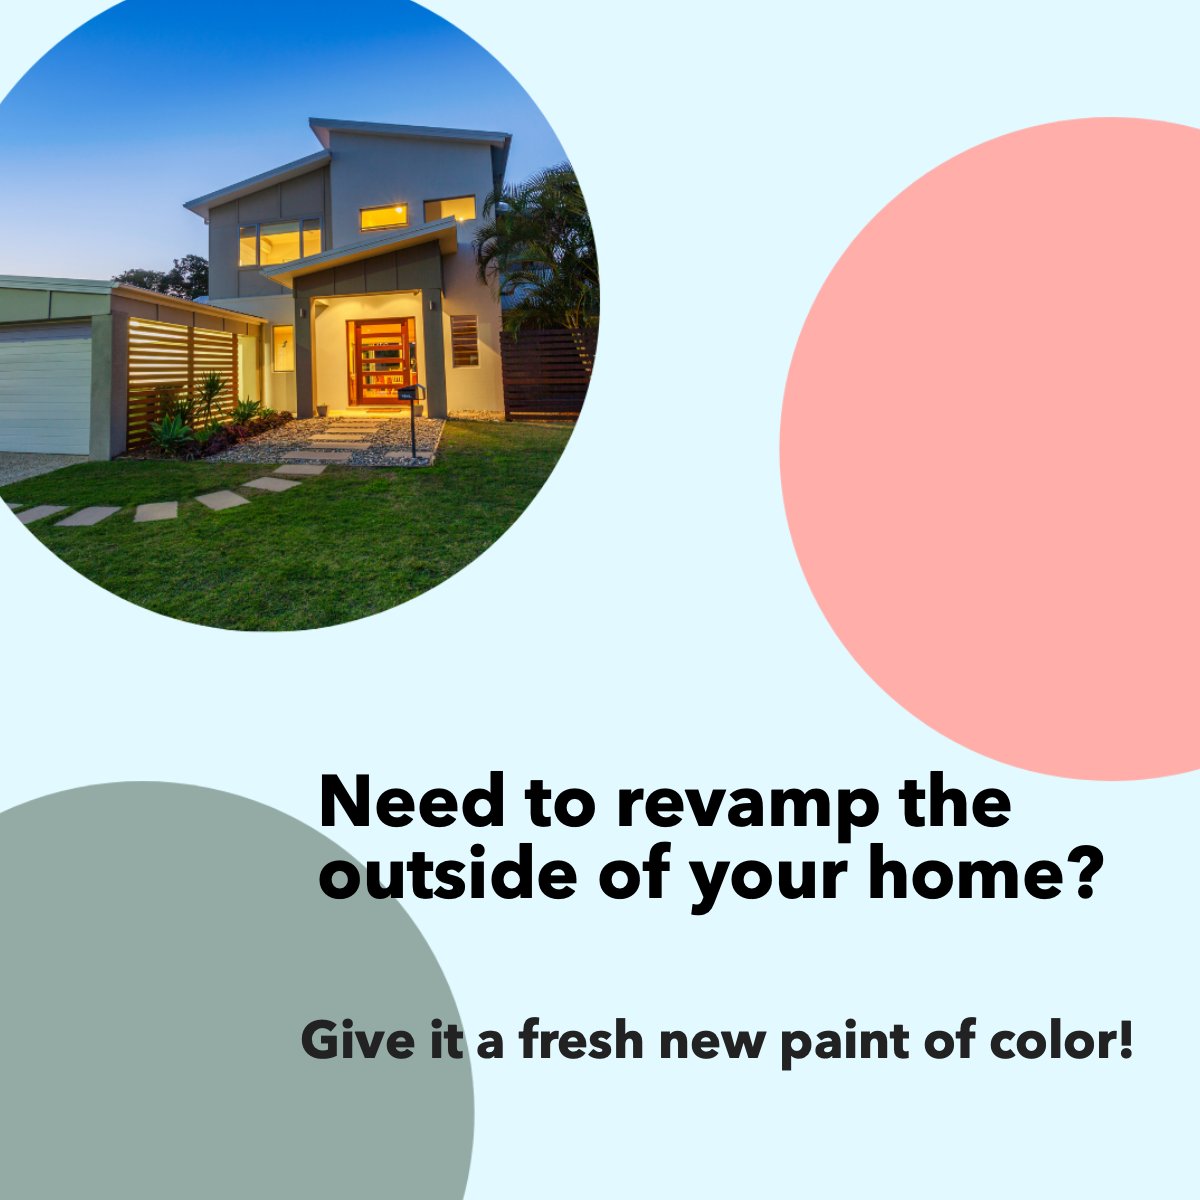 Need to revamp the outside of your home? 🎨

An exterior makeover can maximize curb appeal and give your home a whole new look. 😎

#paintingideas #paint #revamp
 #firstresponderagents #thecooks #yoursocialagents #prescottrealtors #prescottaz